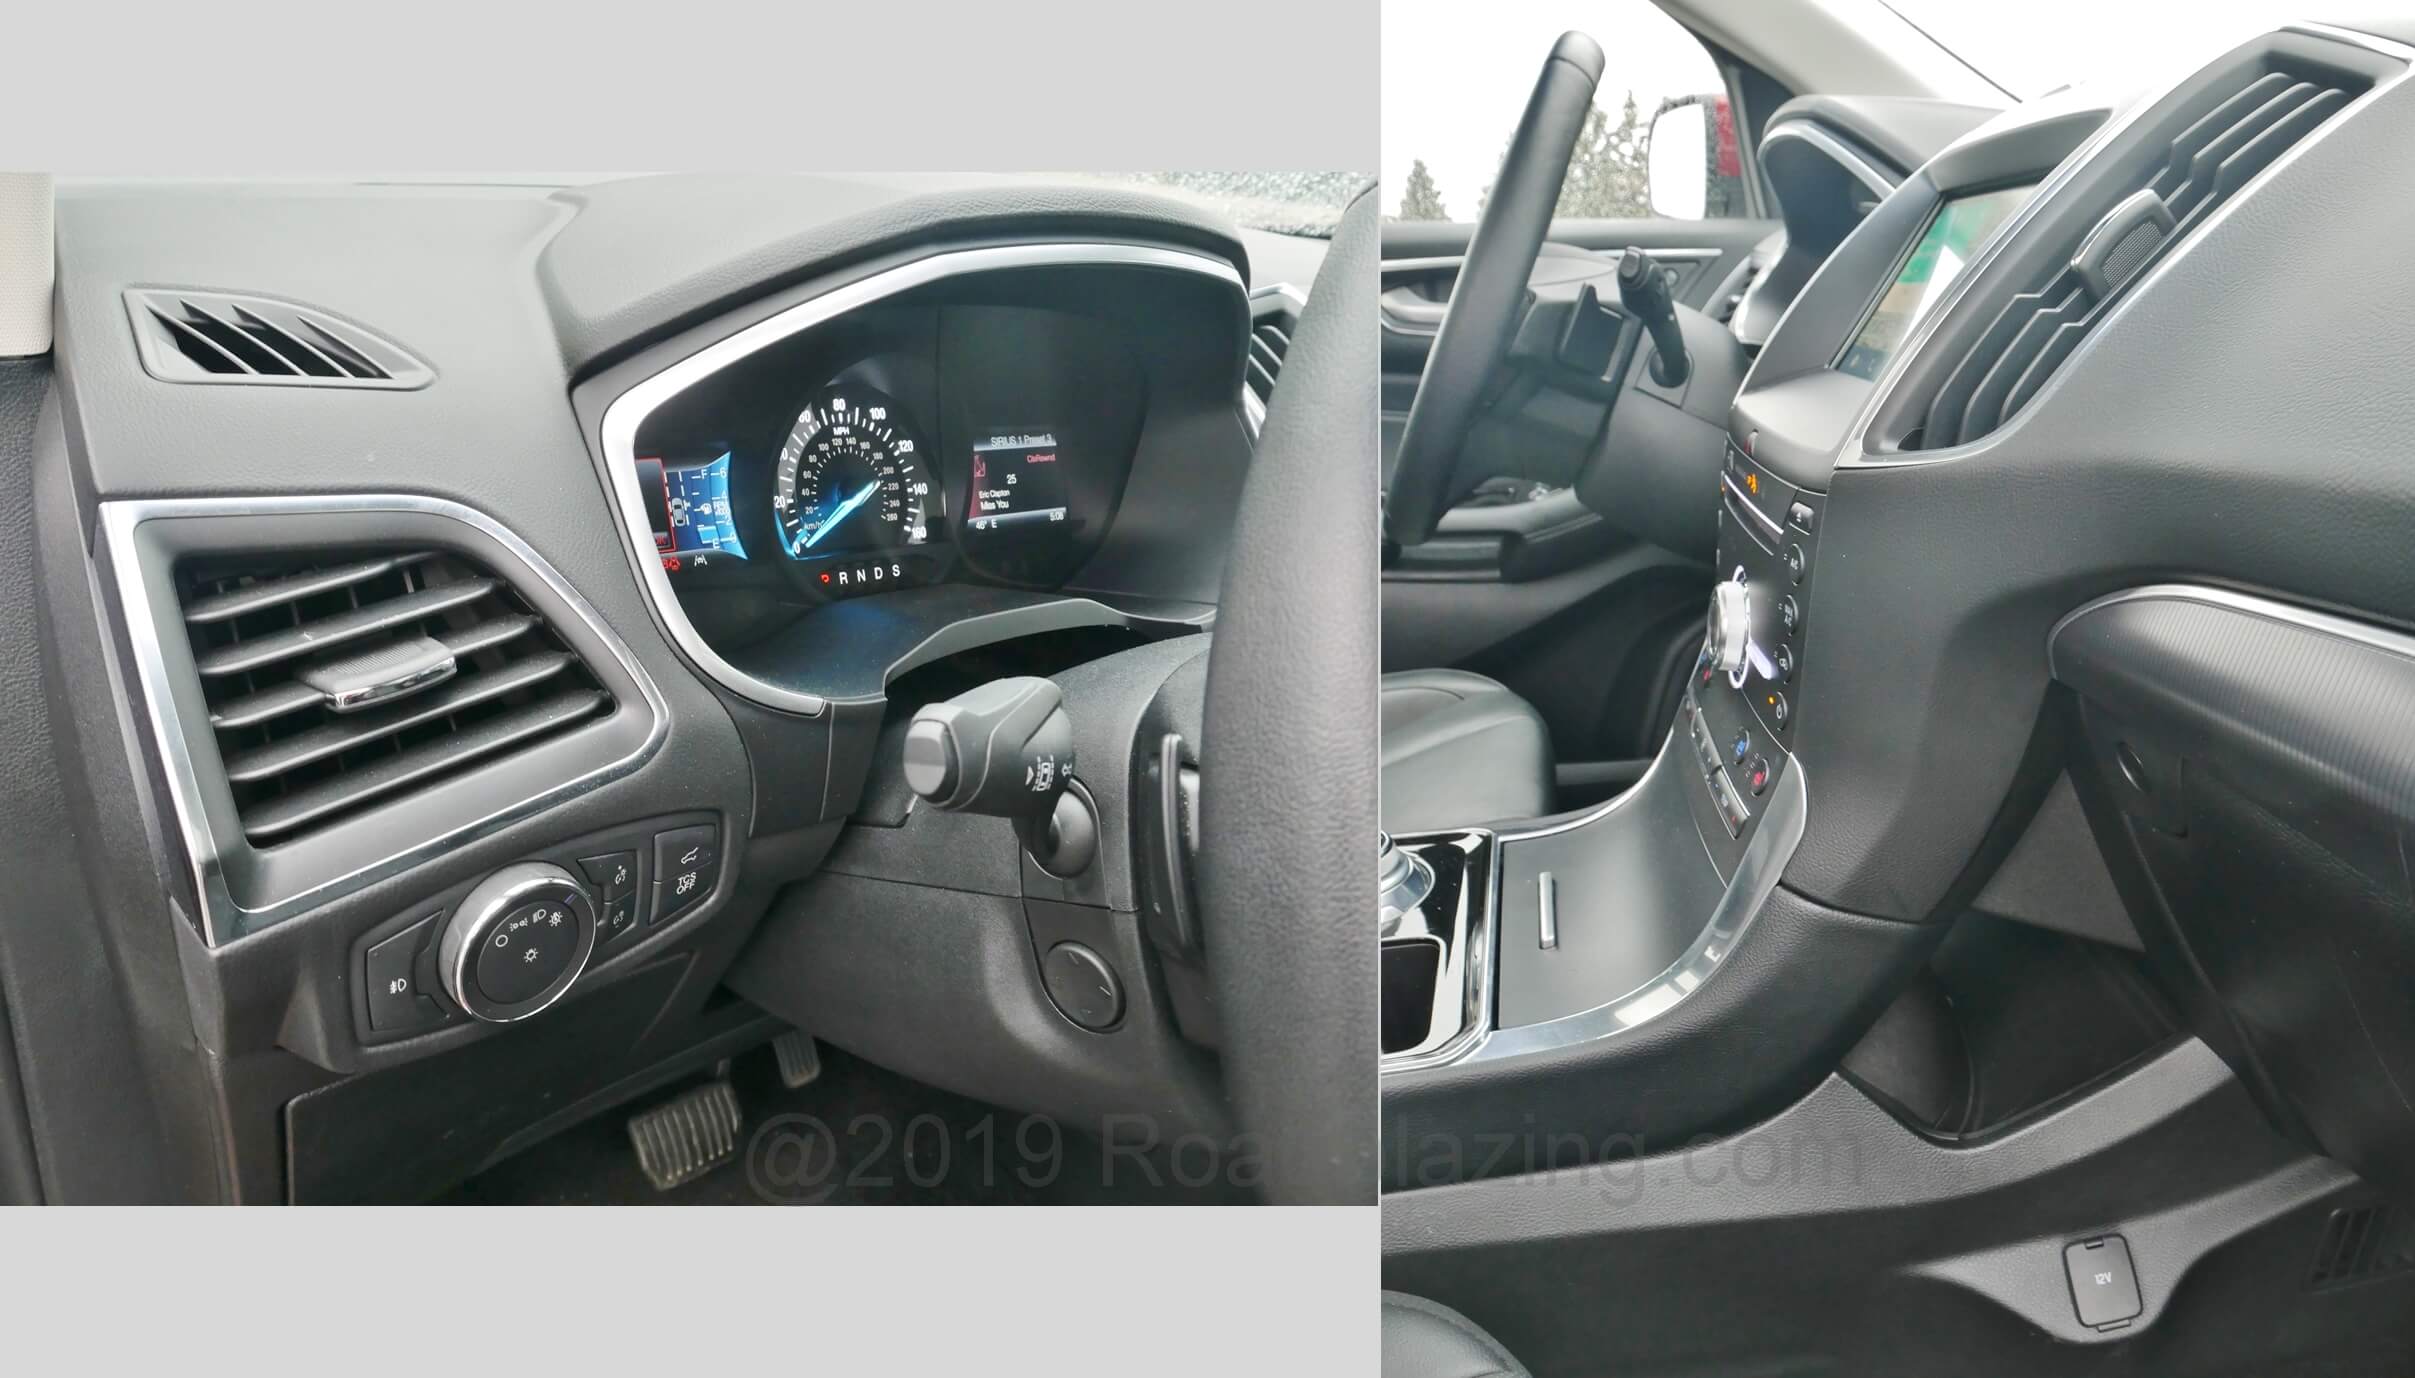 2019 Ford Edge Titanium AWD: Driver's controls; Floating center stack provides semi-concealed electronic device storage